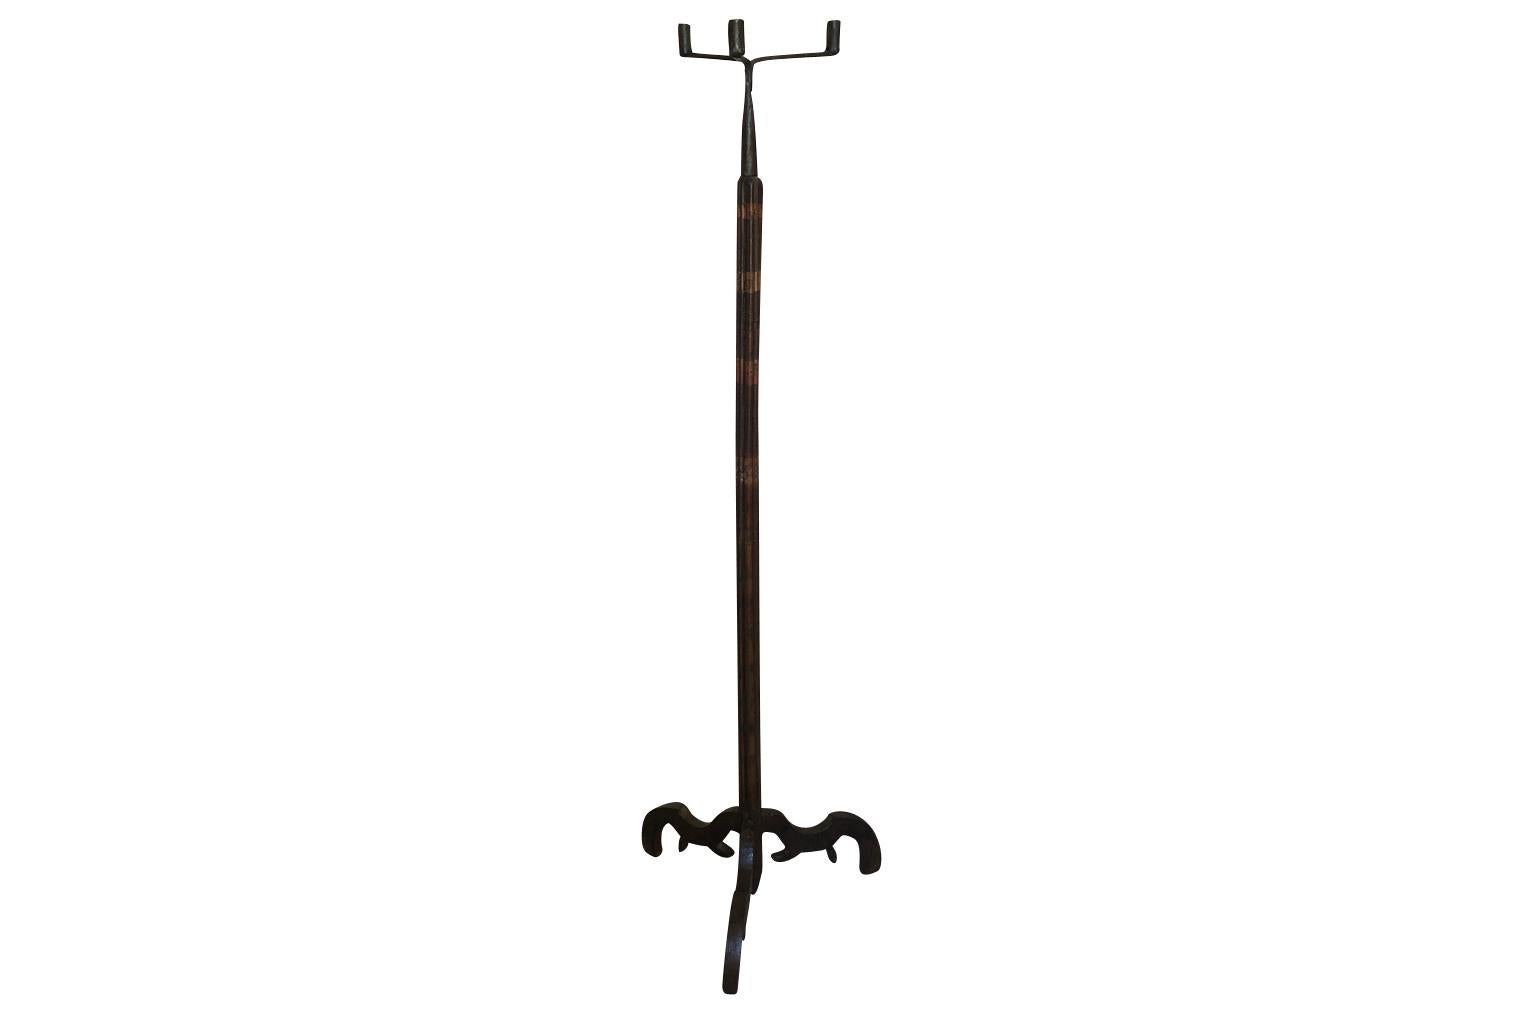 A very handsome 17th century Pique Cierge, floor lamp from the Lombardi region of Italy in polychromed wood and iron. Wonderful patina.